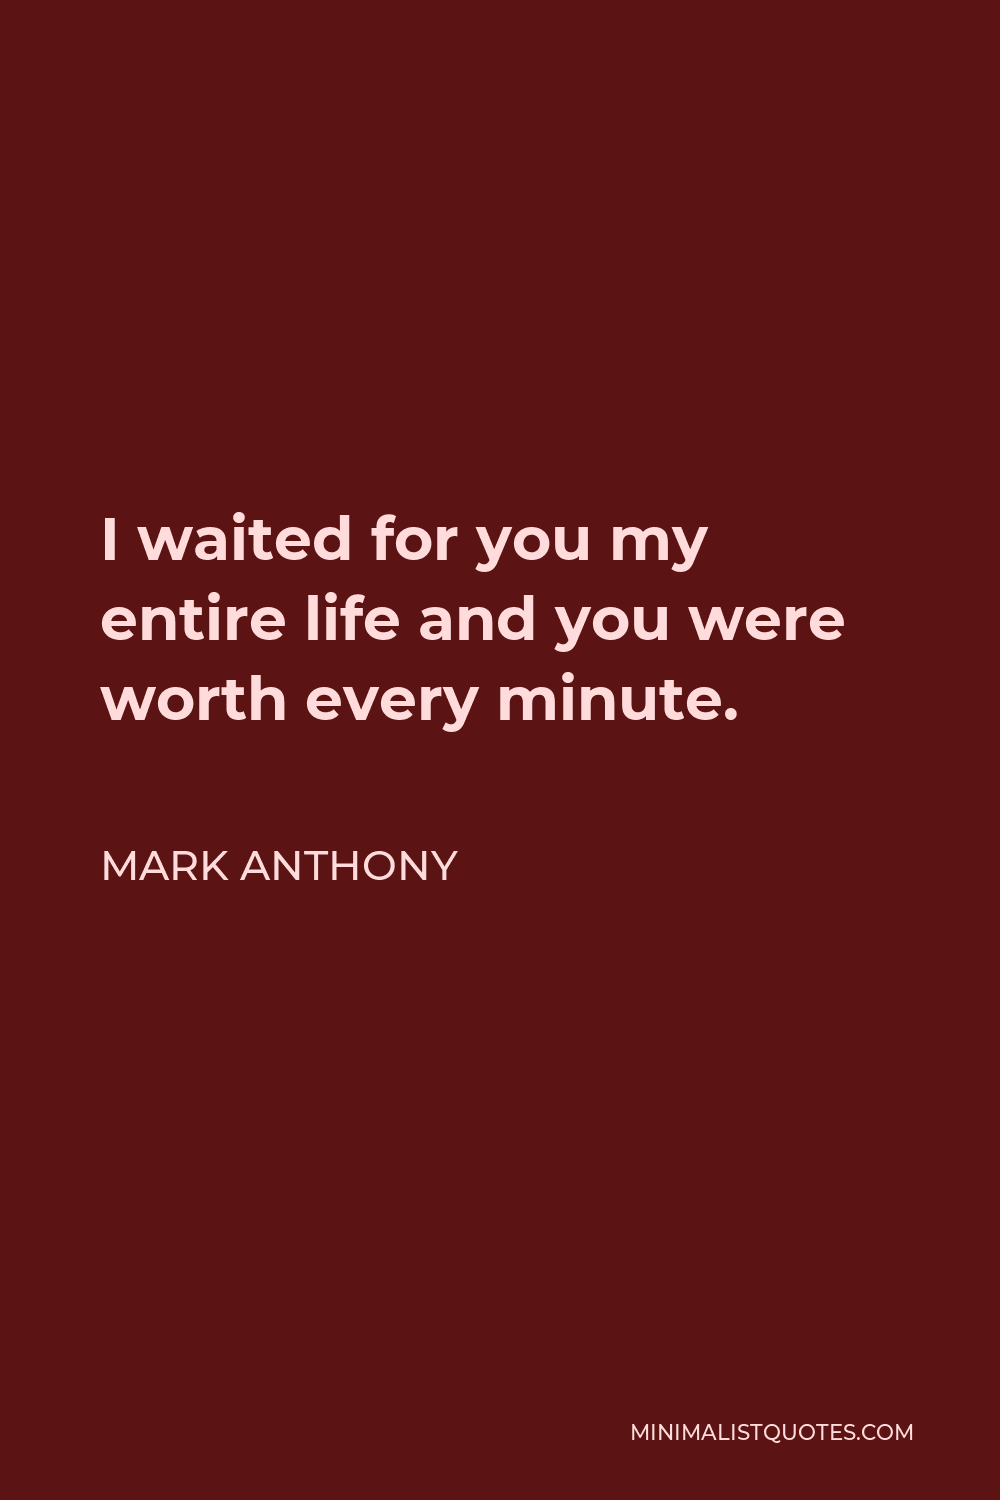 Mark Anthony Quote - I waited for you my entire life and you were worth every minute.